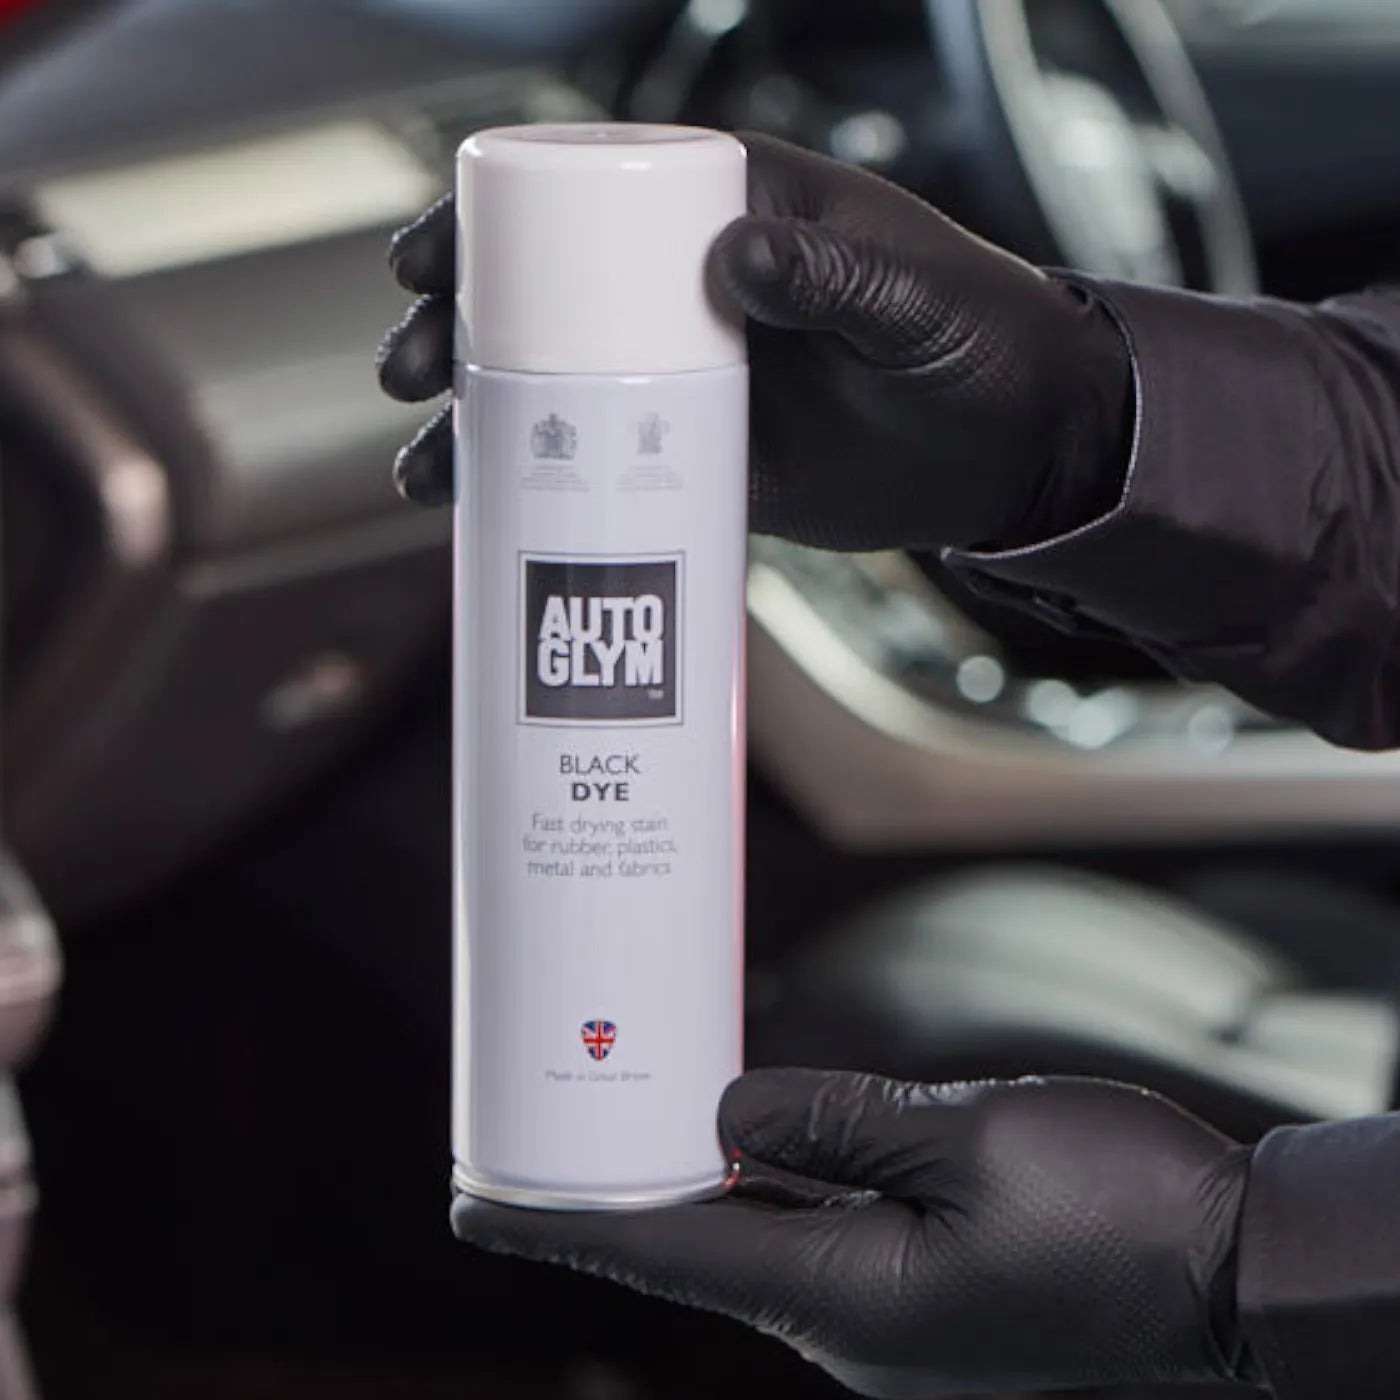 Autoglym Black Carpet Dye. Autoglym Ireland. Autoglym Black Dye is a fast-drying stain for a wide variety of surfaces to restore or improve appearance of tyres, rubber mats, carpets, fibreboard facings and unpainted plastic mouldings or bumpers. Autoglym Ireland